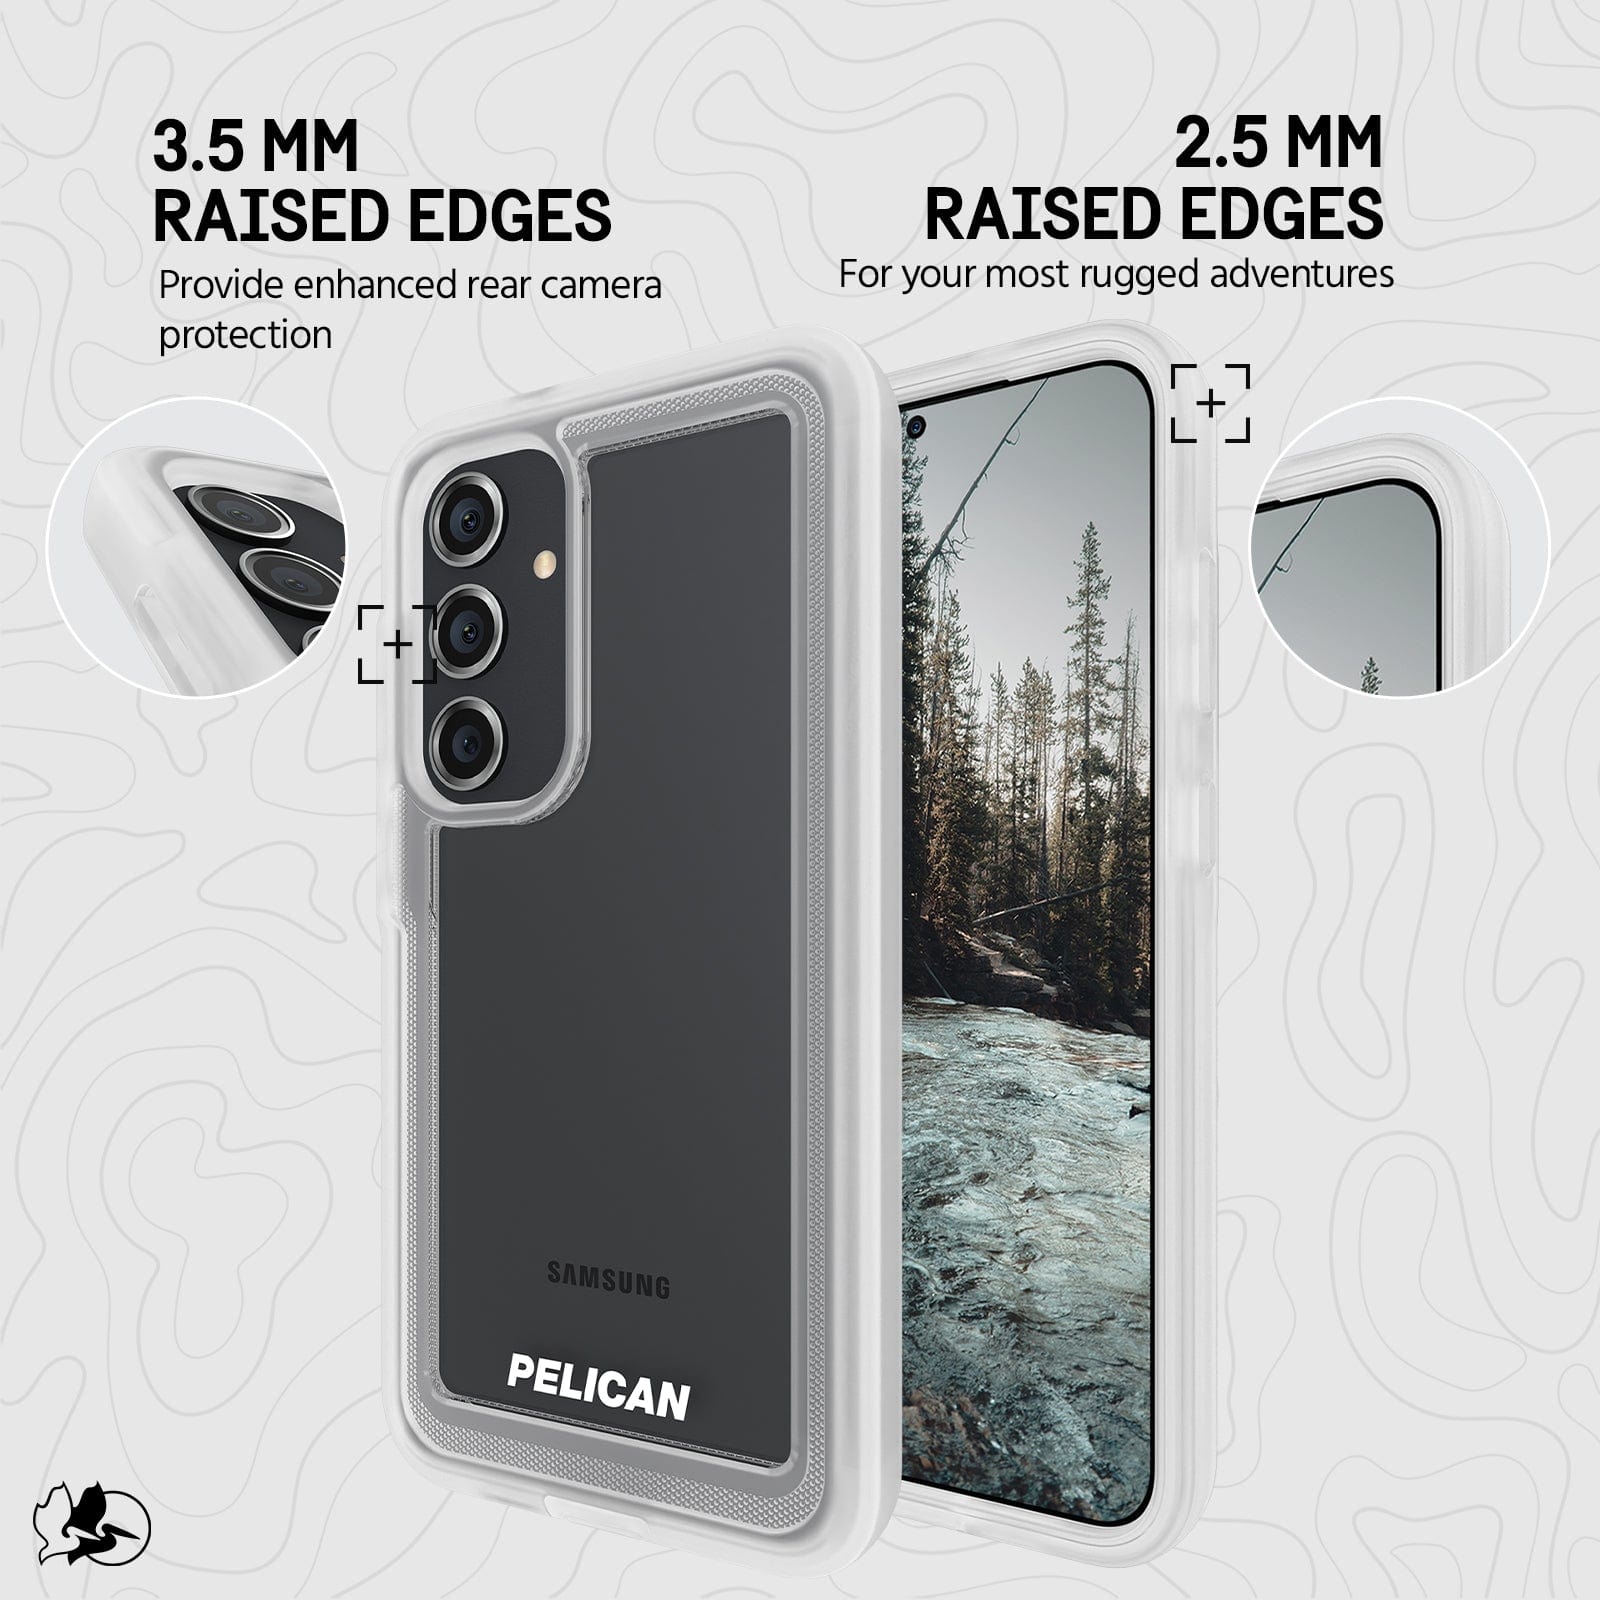 3.5MM RAISED EDGES. PROVIDE ENHANCED REAR CAMERA PROTECTION. 2.5MM RAISED EDGES FOR YOUR MOST RUGGED ADVENTURES.